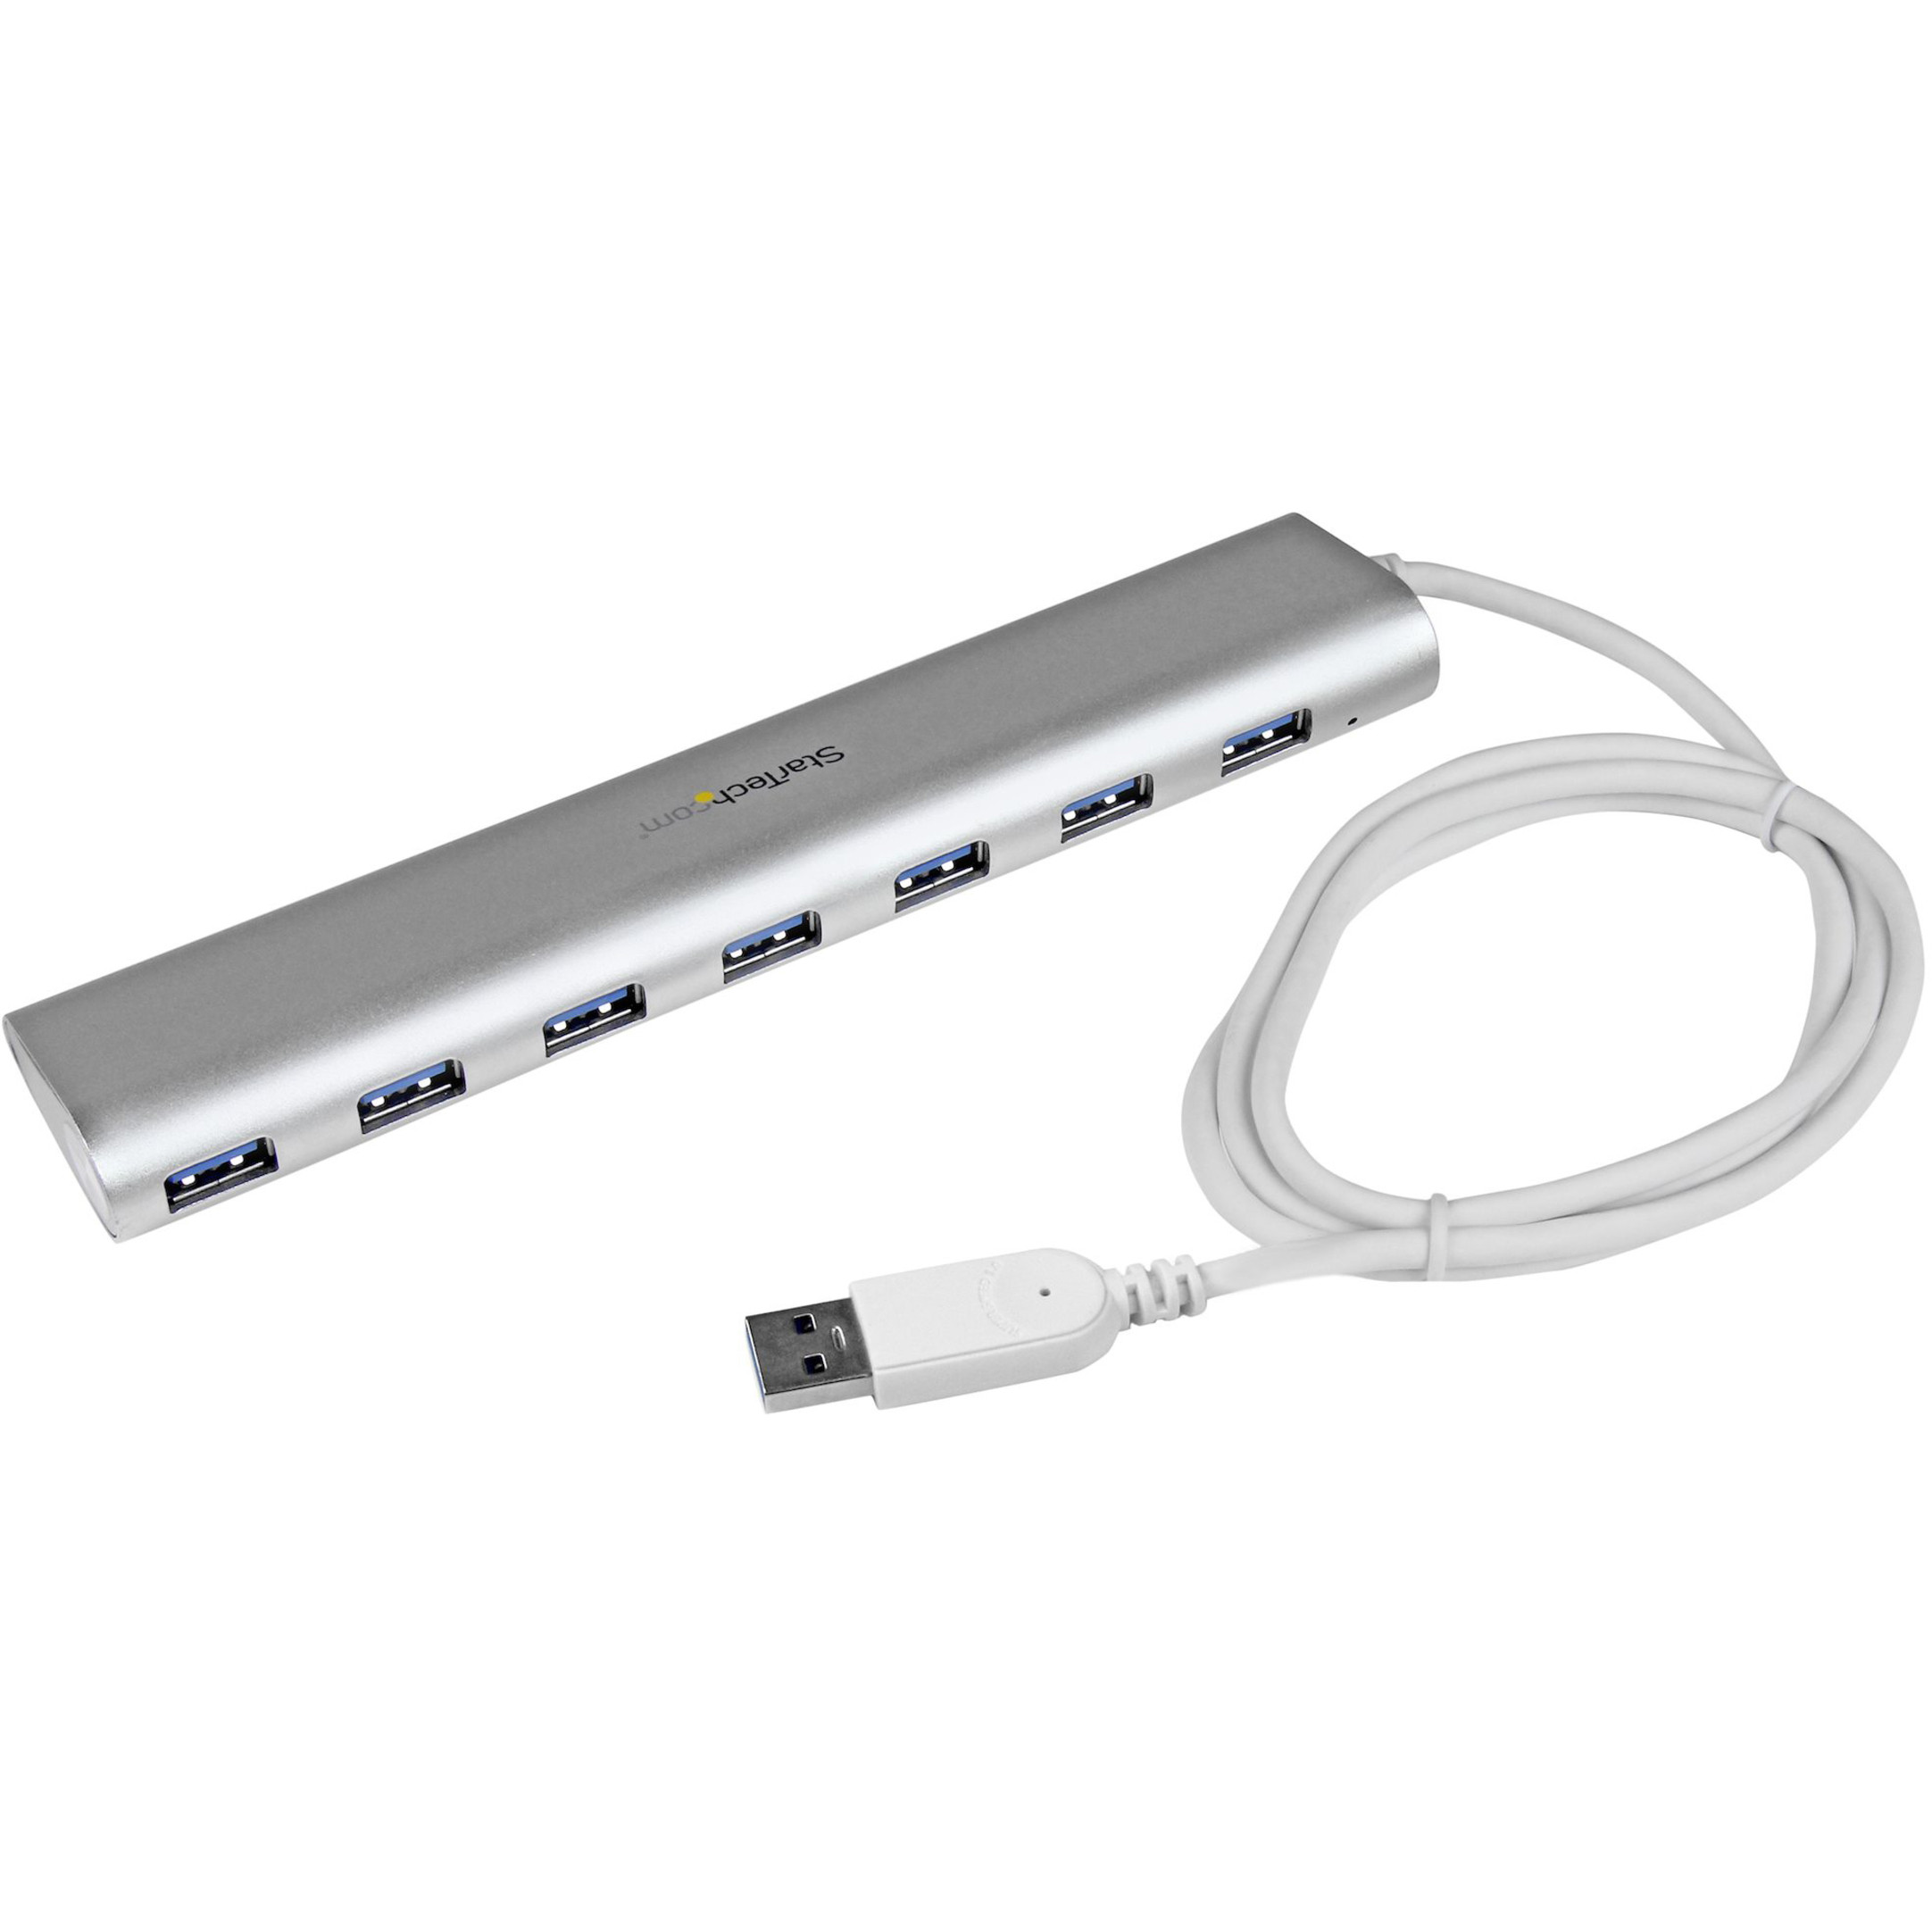 Startech .com 7 Port Compact USB 3.0 Hub with Built-in CableAluminum USB HubSilverAdd seven USB 3.0 (5Gbps) ports to your MacBook usin… ST73007UA